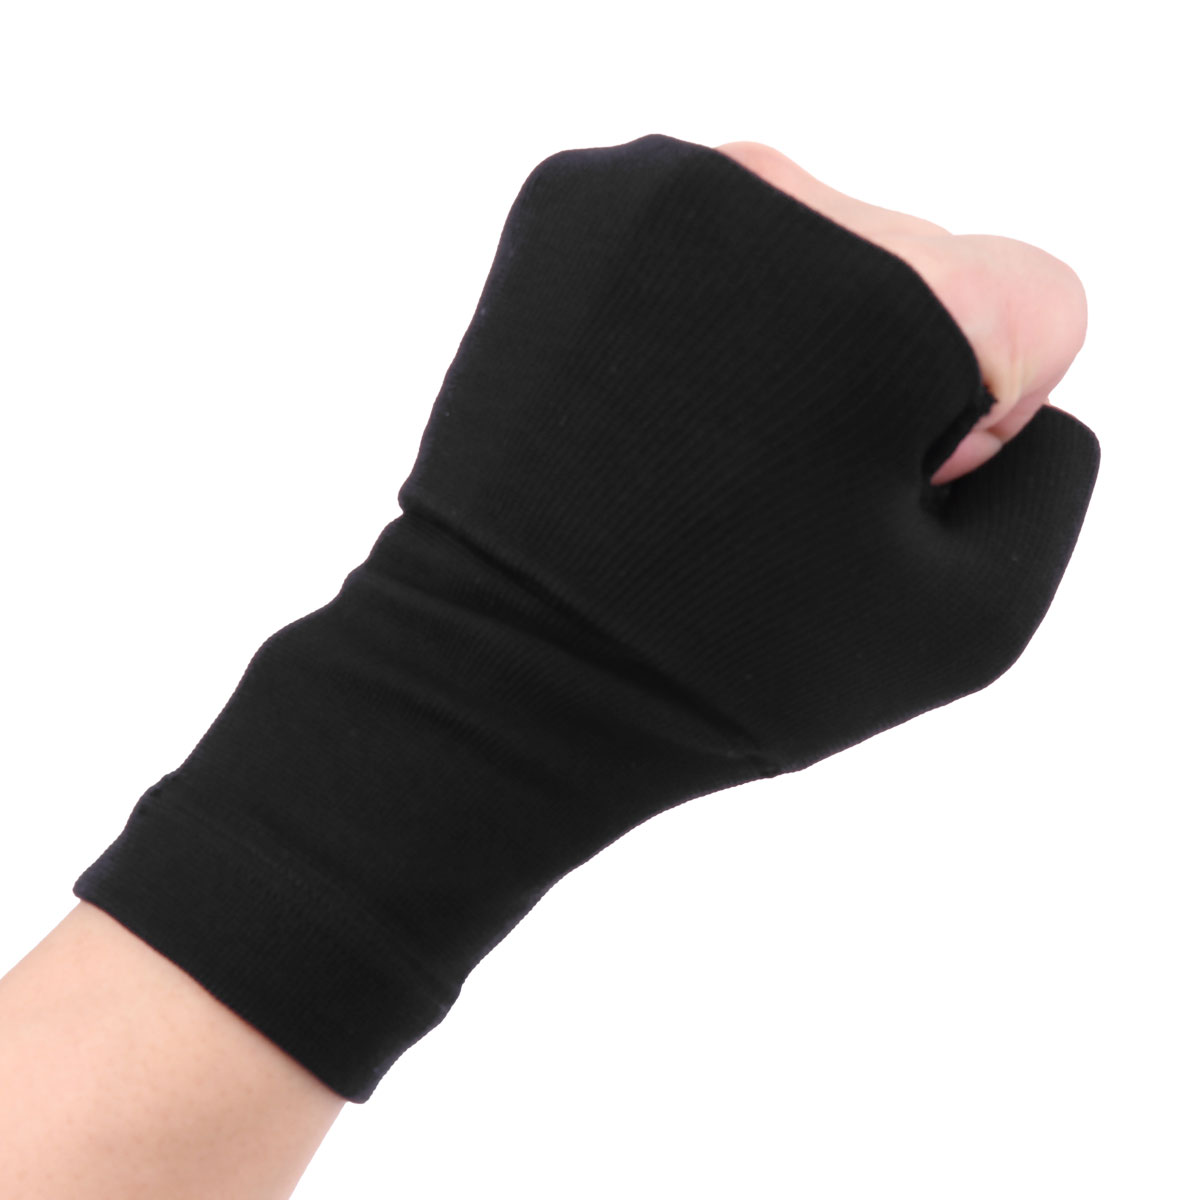 Pairs） Fibee Night Wrist Sleep Support Brace Wrist Splint for Men and Women Palm Cushion Relieves Carpal Tunnel Night Wrist Brace with Metal Support for Right Left Hand Tendonitis Ulnar Pain Etc 